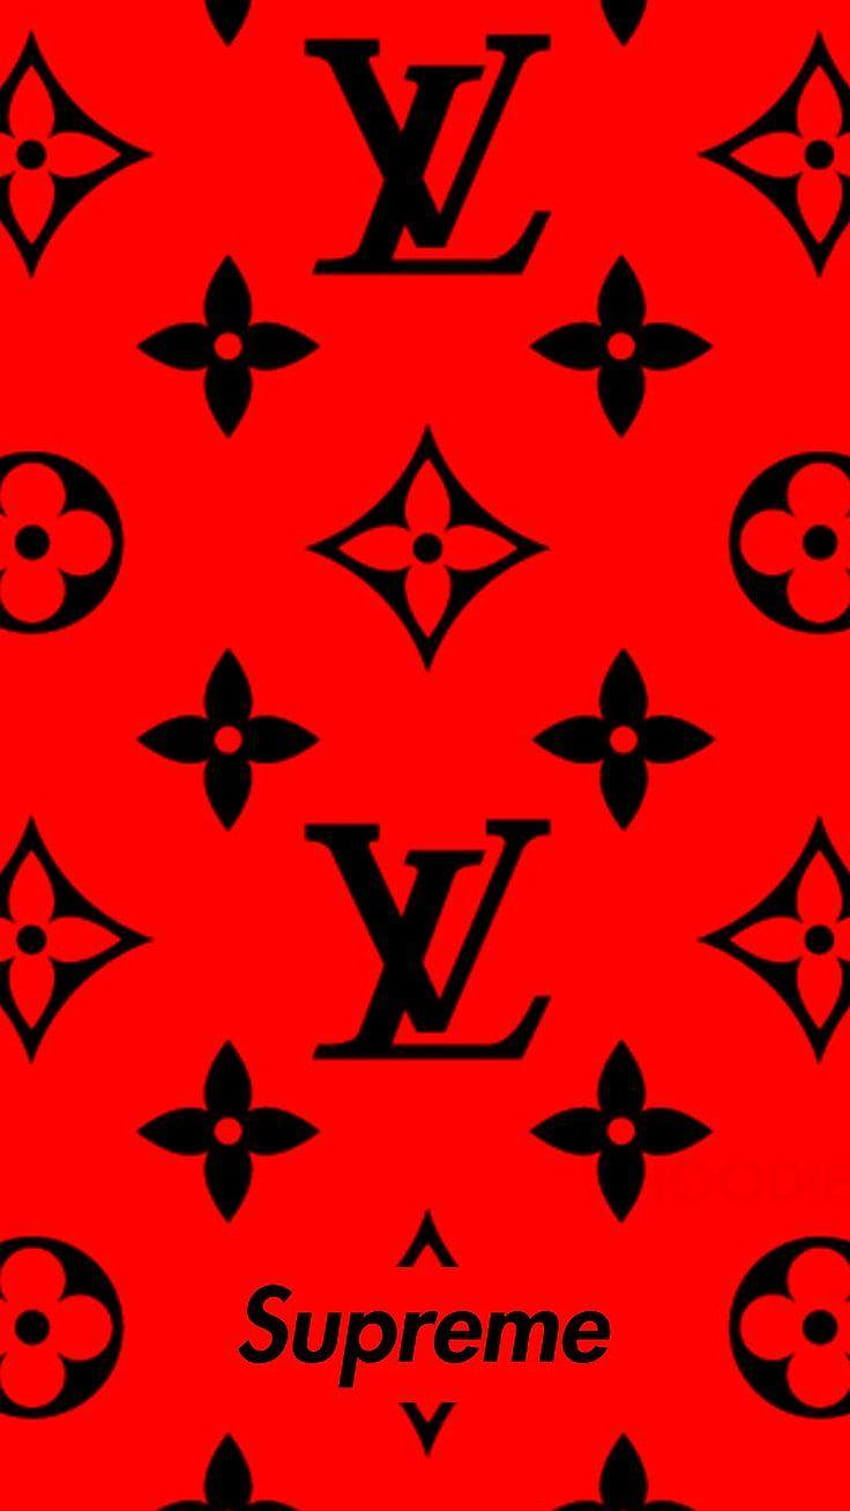 Image by Kimberly Rochin  Louis vuitton iphone wallpaper, Iphone art,  Iphone wallpaper